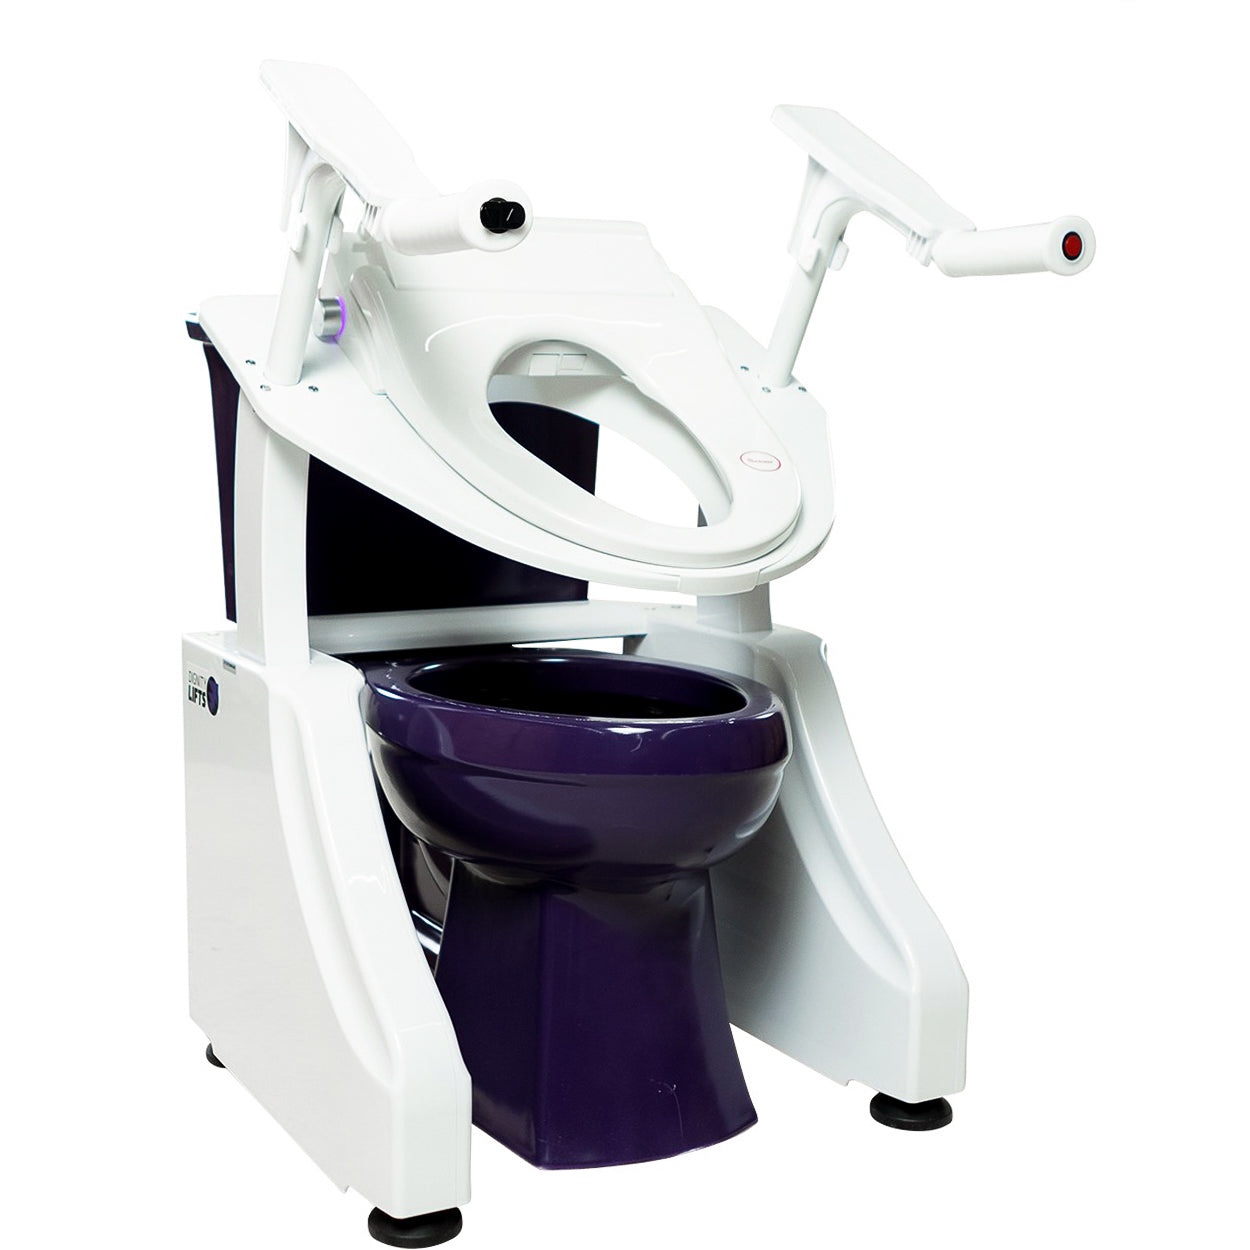 Image of Dignity Lifts - Bidet Toilet Lift - WL1 - Sold Out Until December 20th